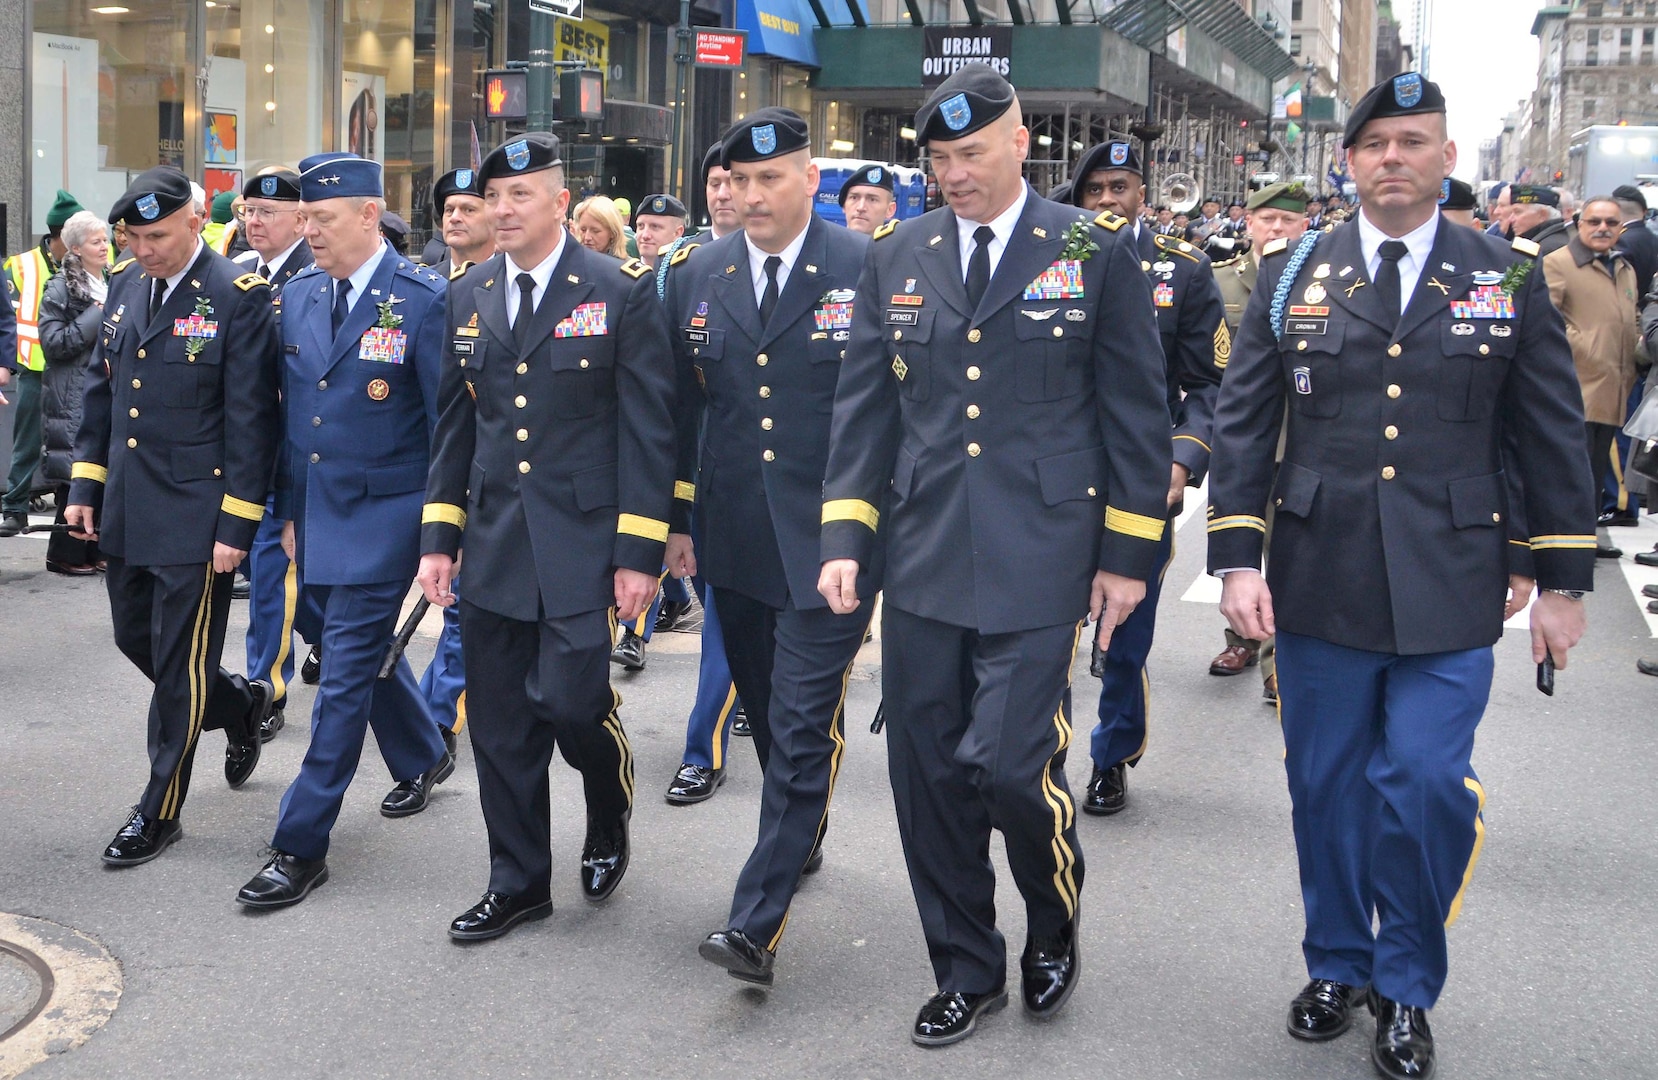 Leaders of the New York National Guard join the  1st Battalion, 69th Infantry,  during the New York City St. Patrick's Day Parade on March 16, 2019. The 1st Battalion, 69th Infantry traditionally leads the world's largest St. Patrick's Day Parade.